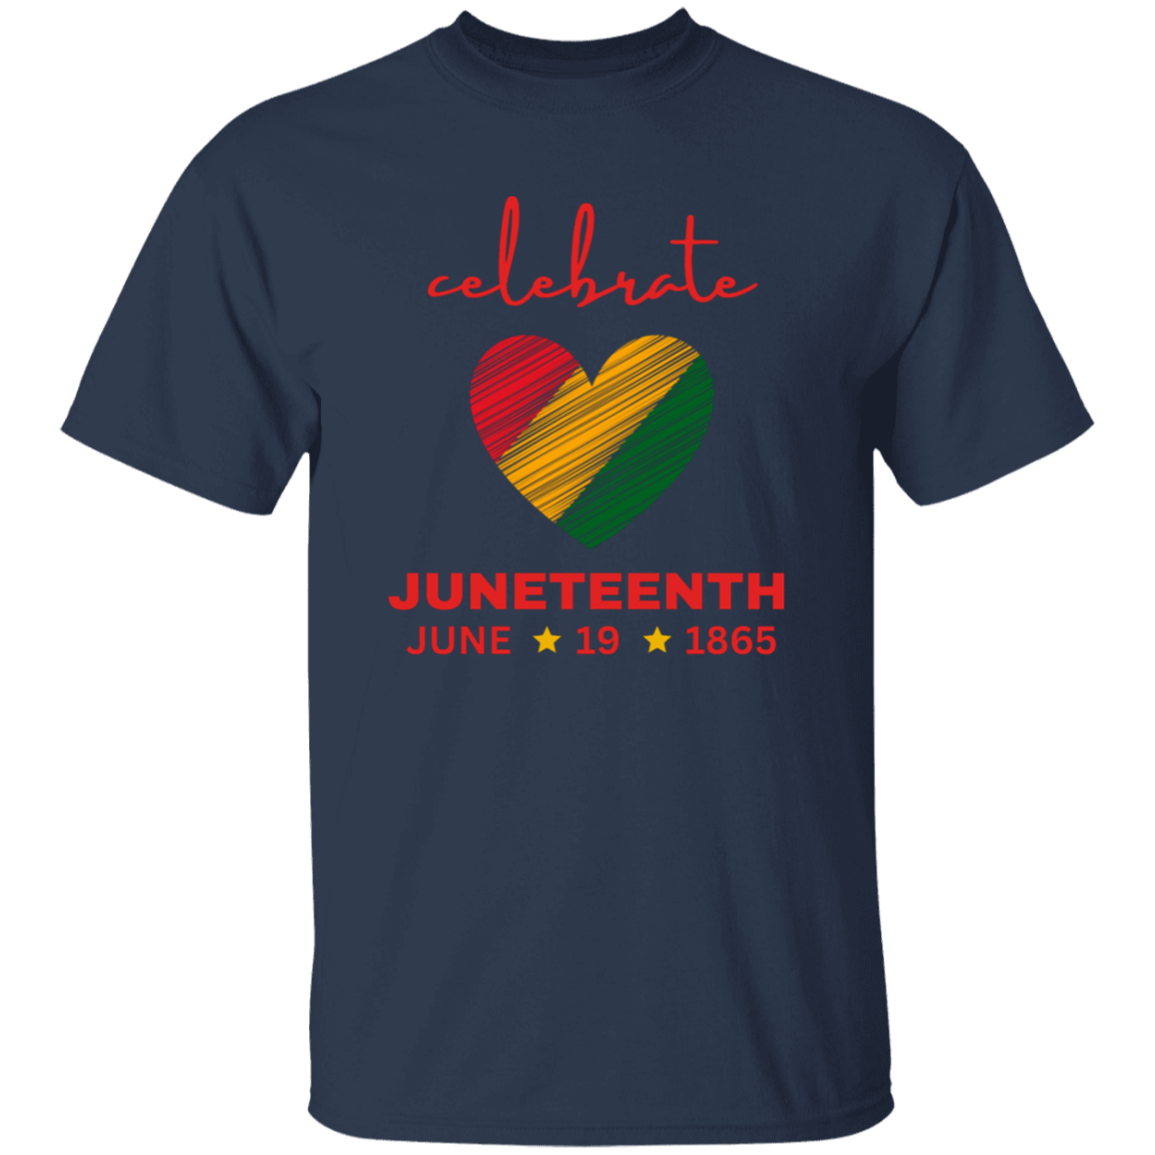 Juneteenth | Youth Tee in Blk | Heart